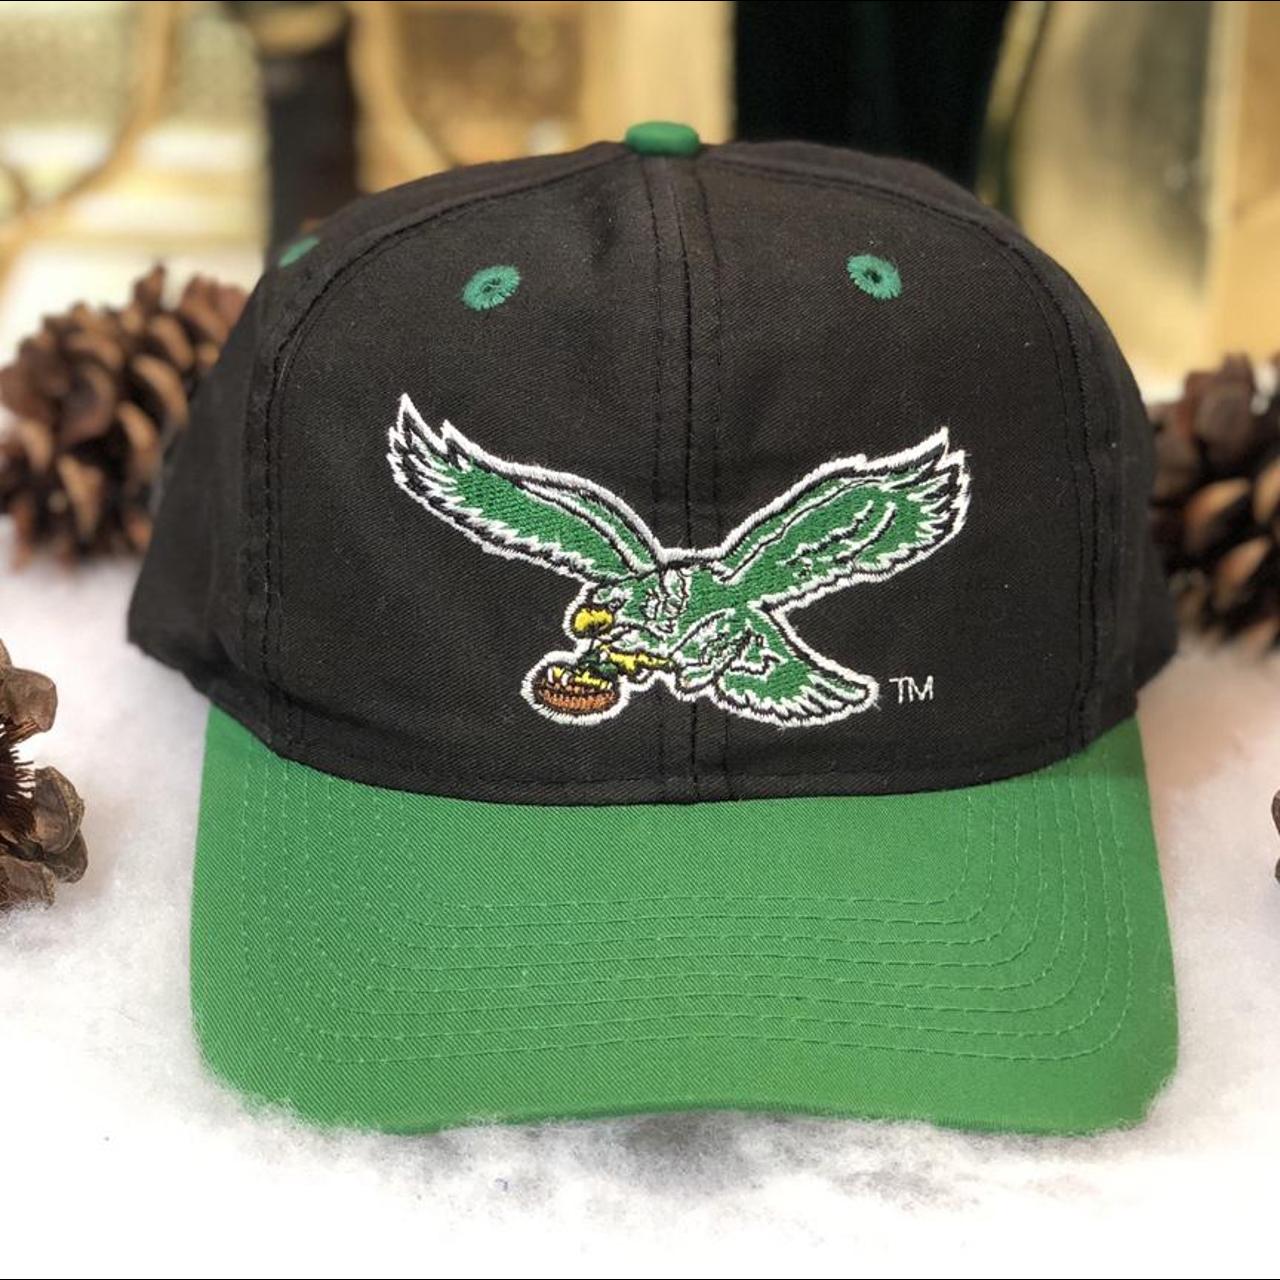 Men's Black and Green Hat